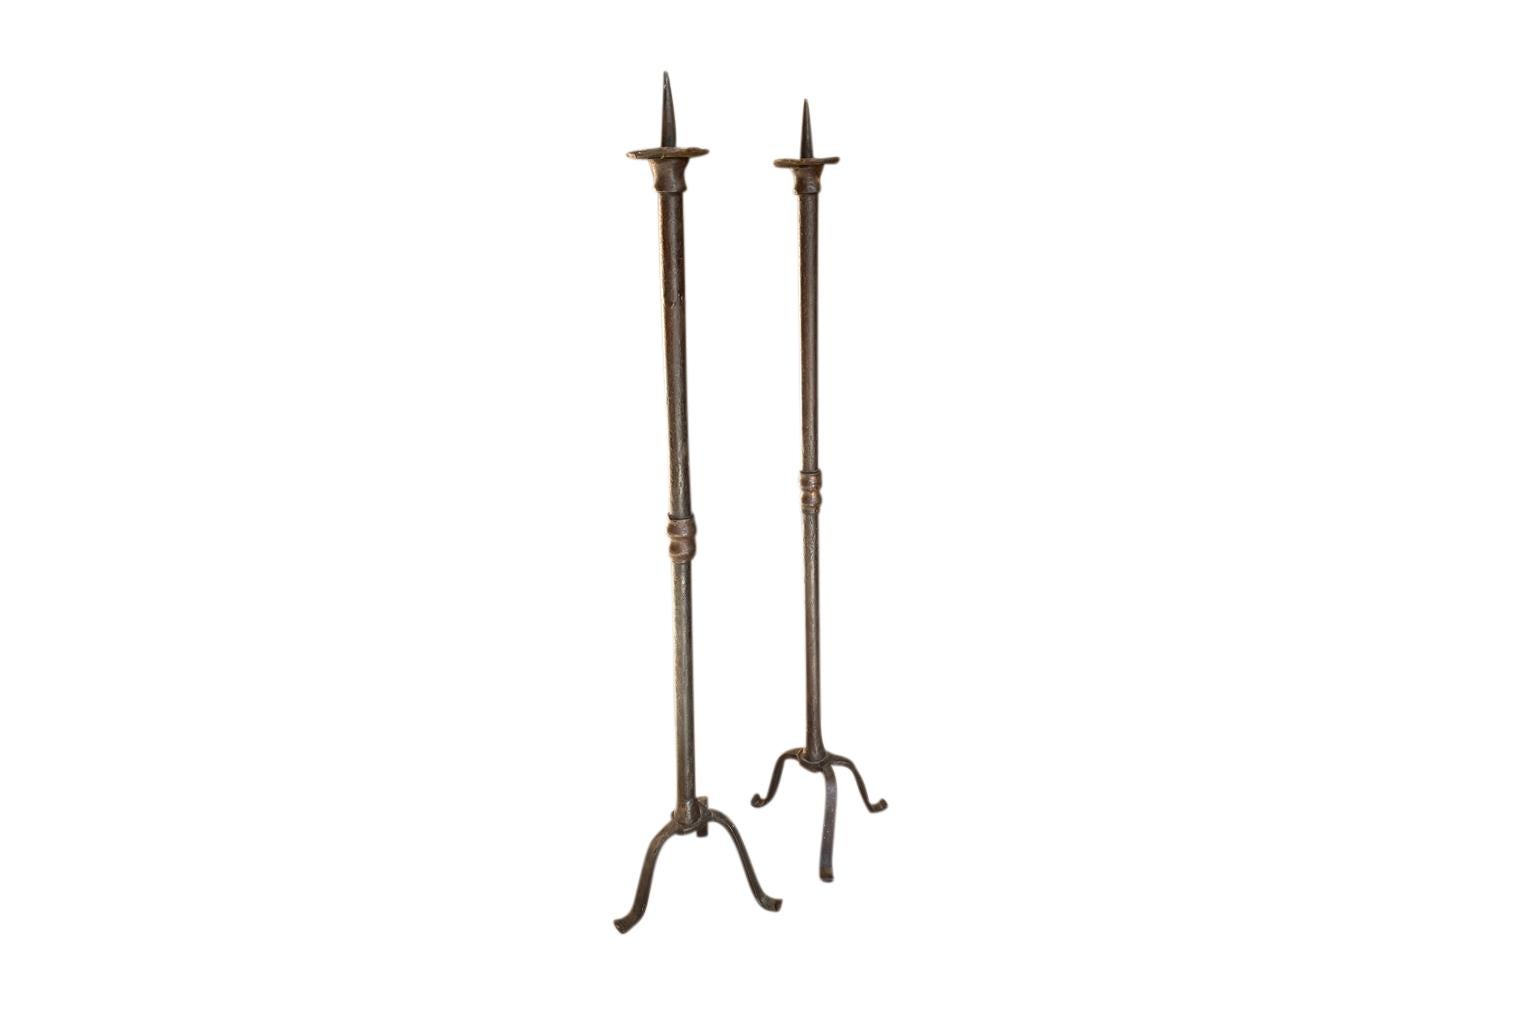 A wonderful pair of 18th century Piques Cierges from the Provence region of France. Beautifully crafted from hand forged iron. Wonderful patina. A perfect addition to any table top.